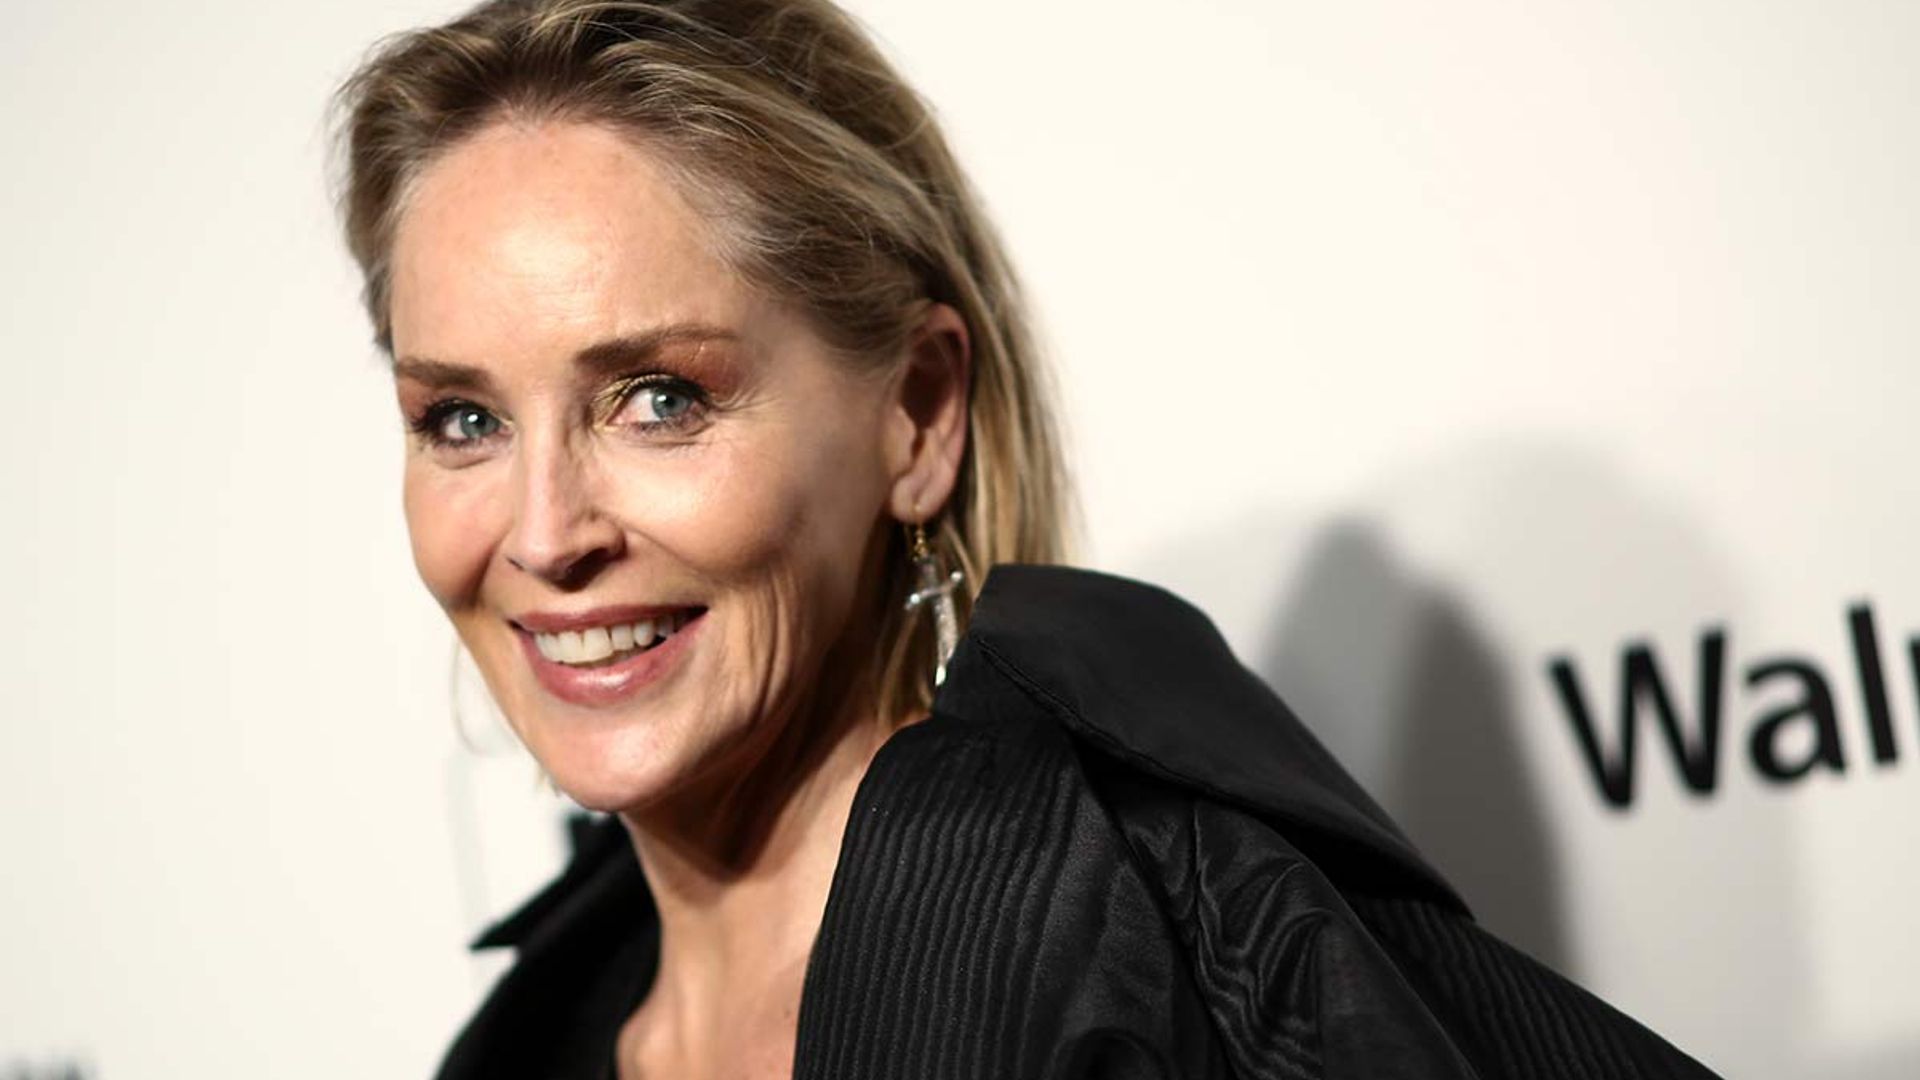 Sharon Stone joined by lookalike mother as she marks incredible achievement